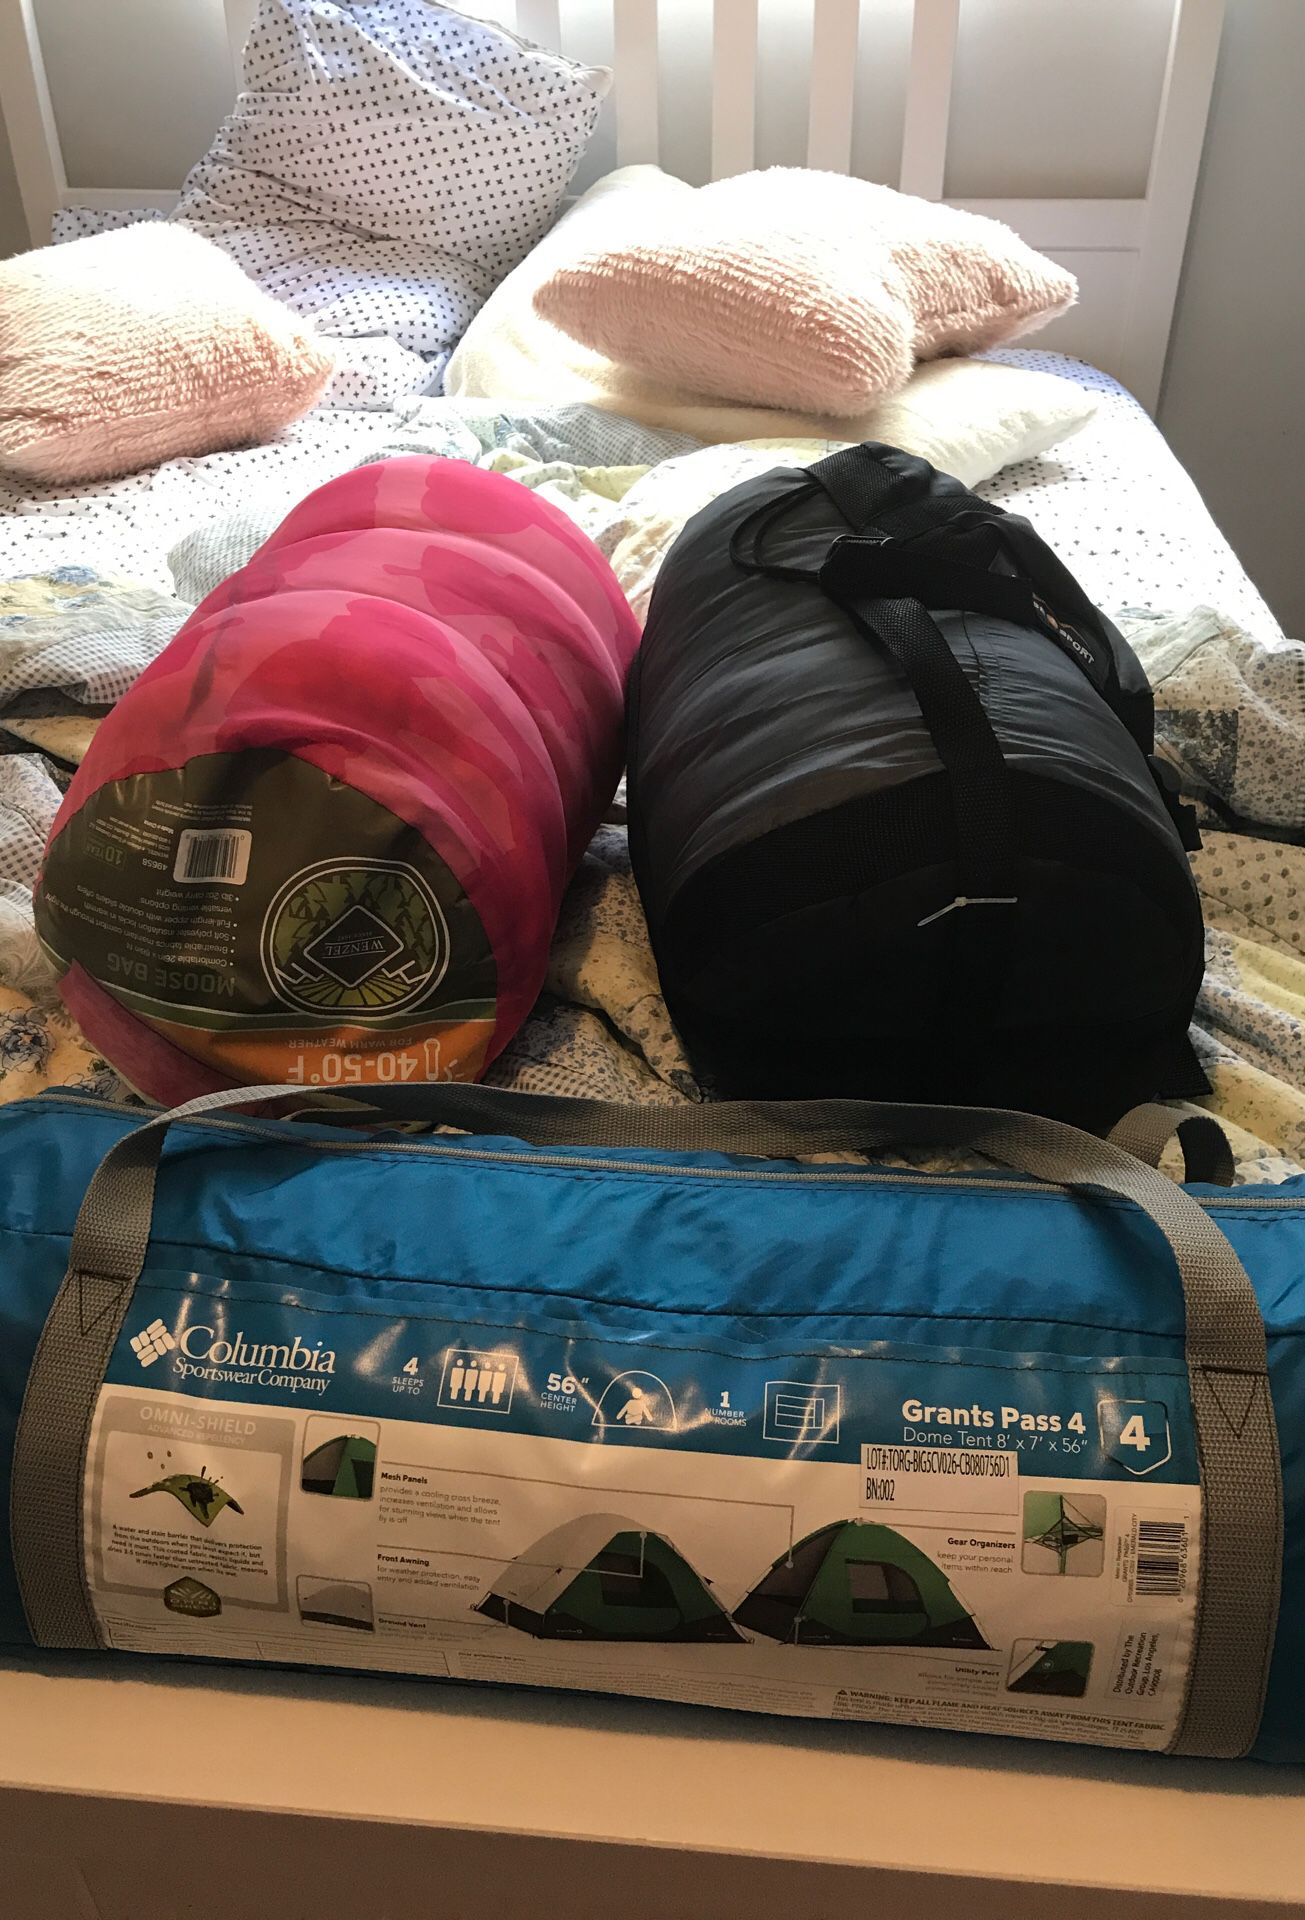 Two sleeping bags and a tent $50